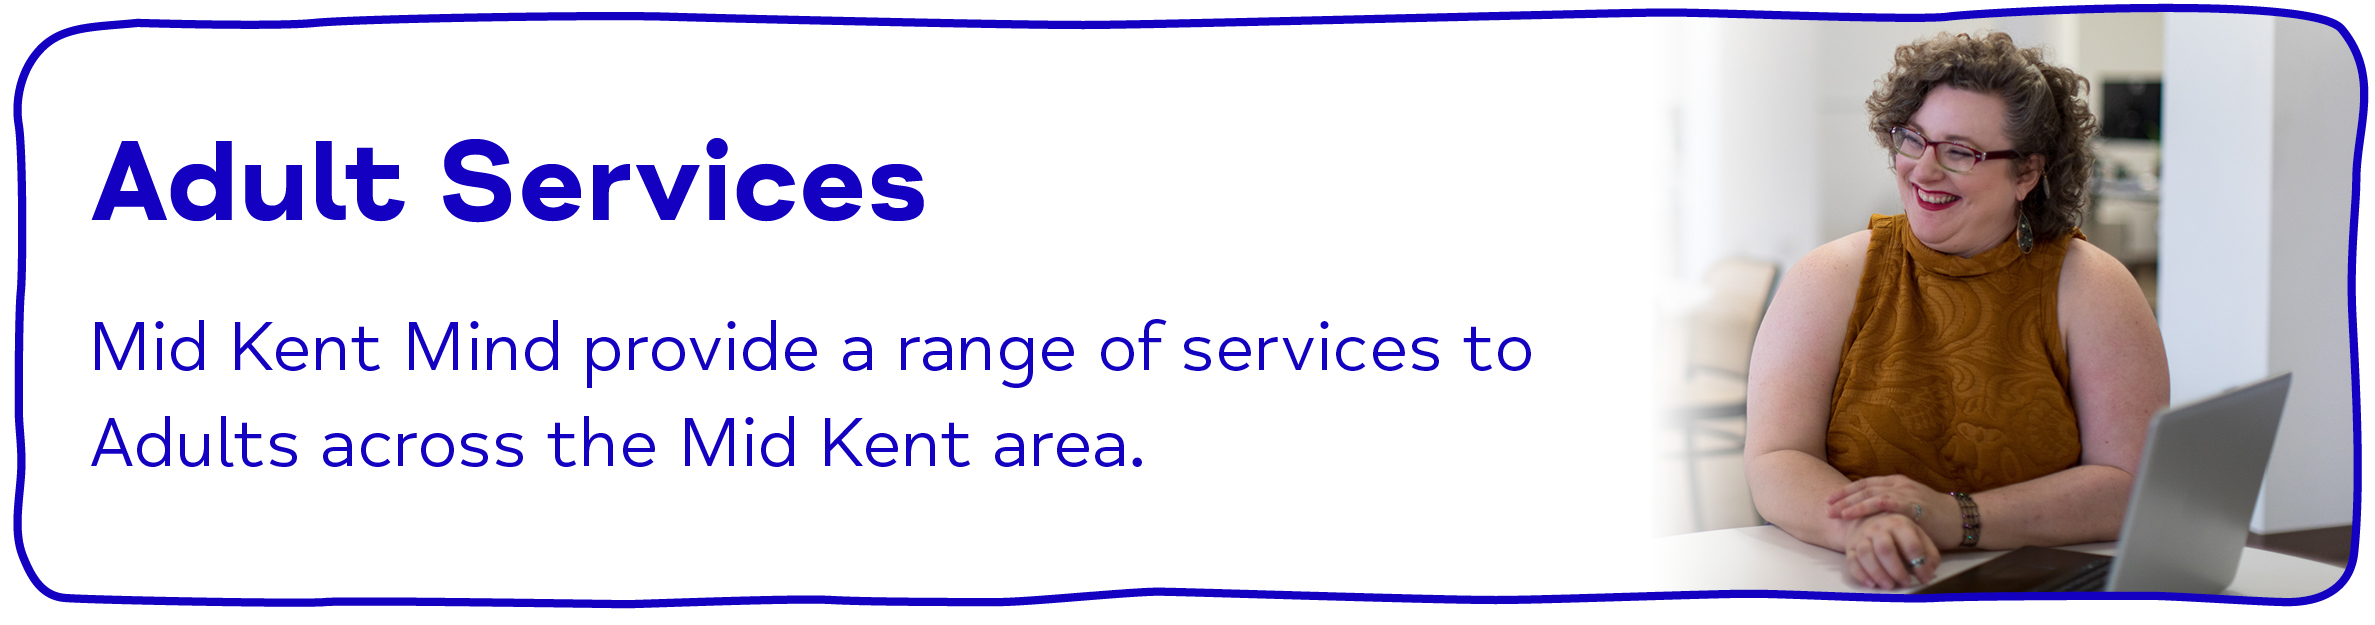 Adult Services Mid Kent Mind provide a range of services to Adults across the Mid Kent area.